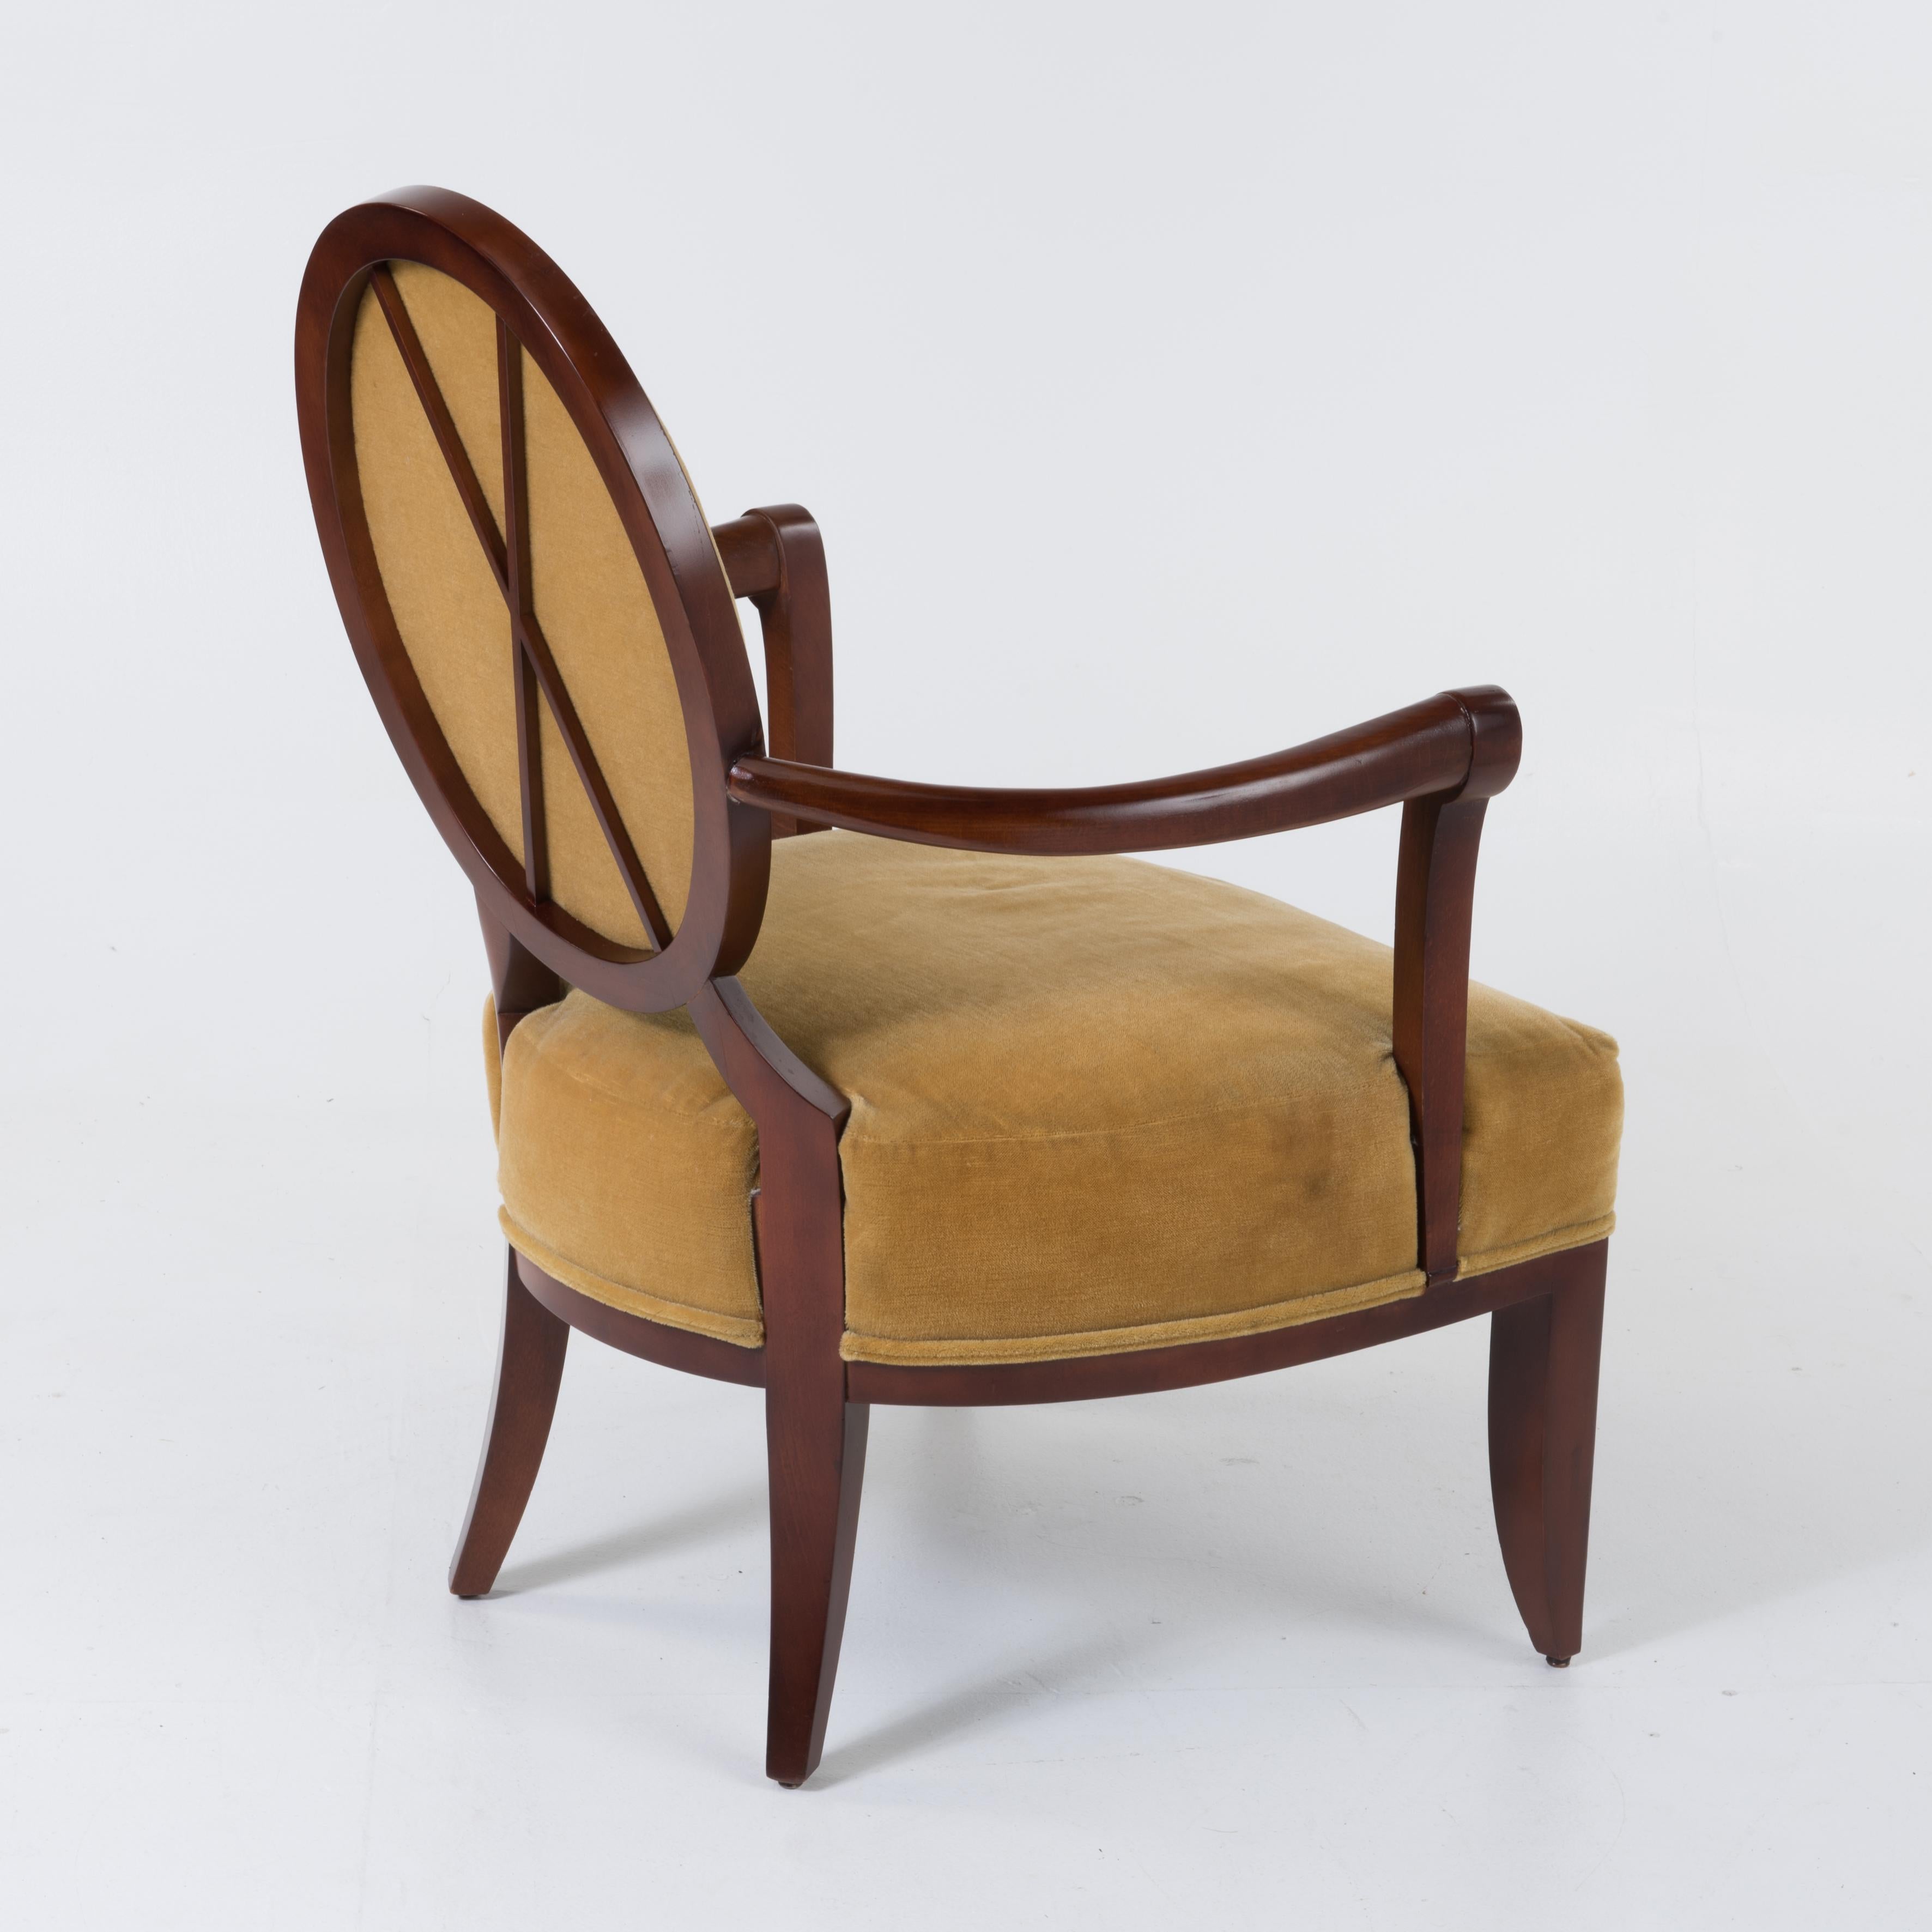 Late 20th Century Sumptuous Barbara Barry Regency Style Mahogany Arm Chair